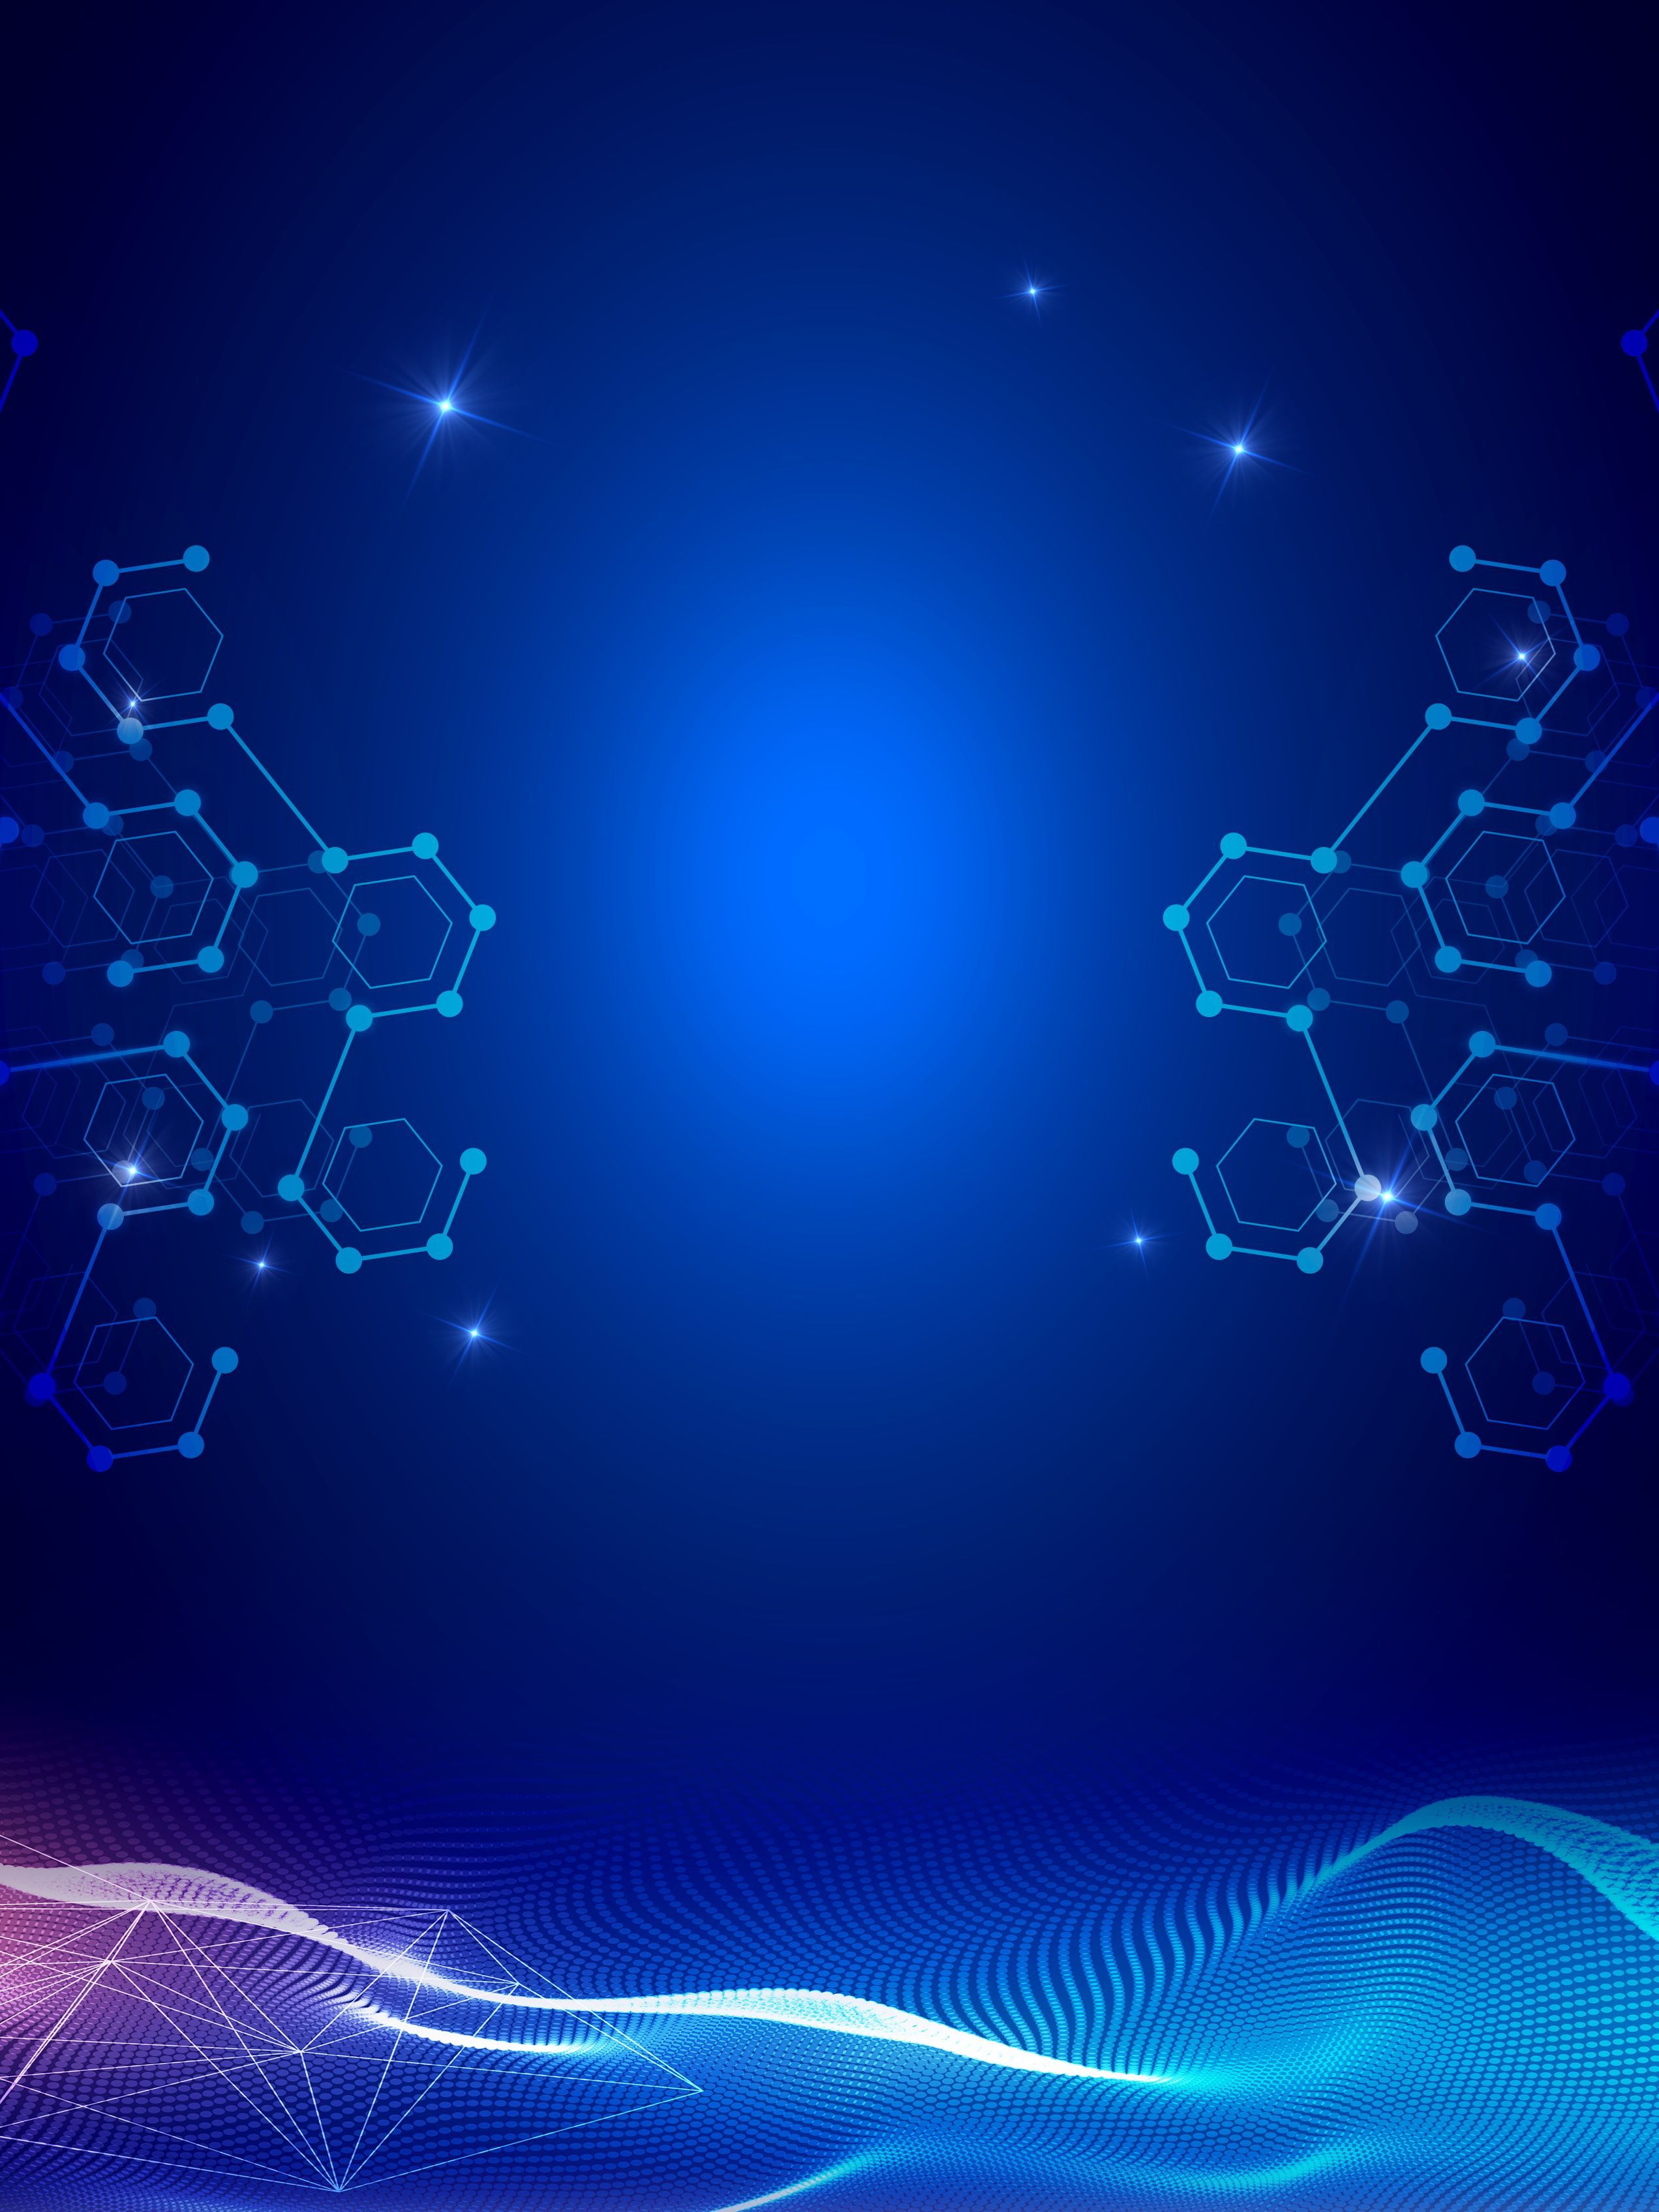 Aesthetic Blue Technology Background Display Board Wallpaper Image For Free Download. Technology background, Background image, Background design